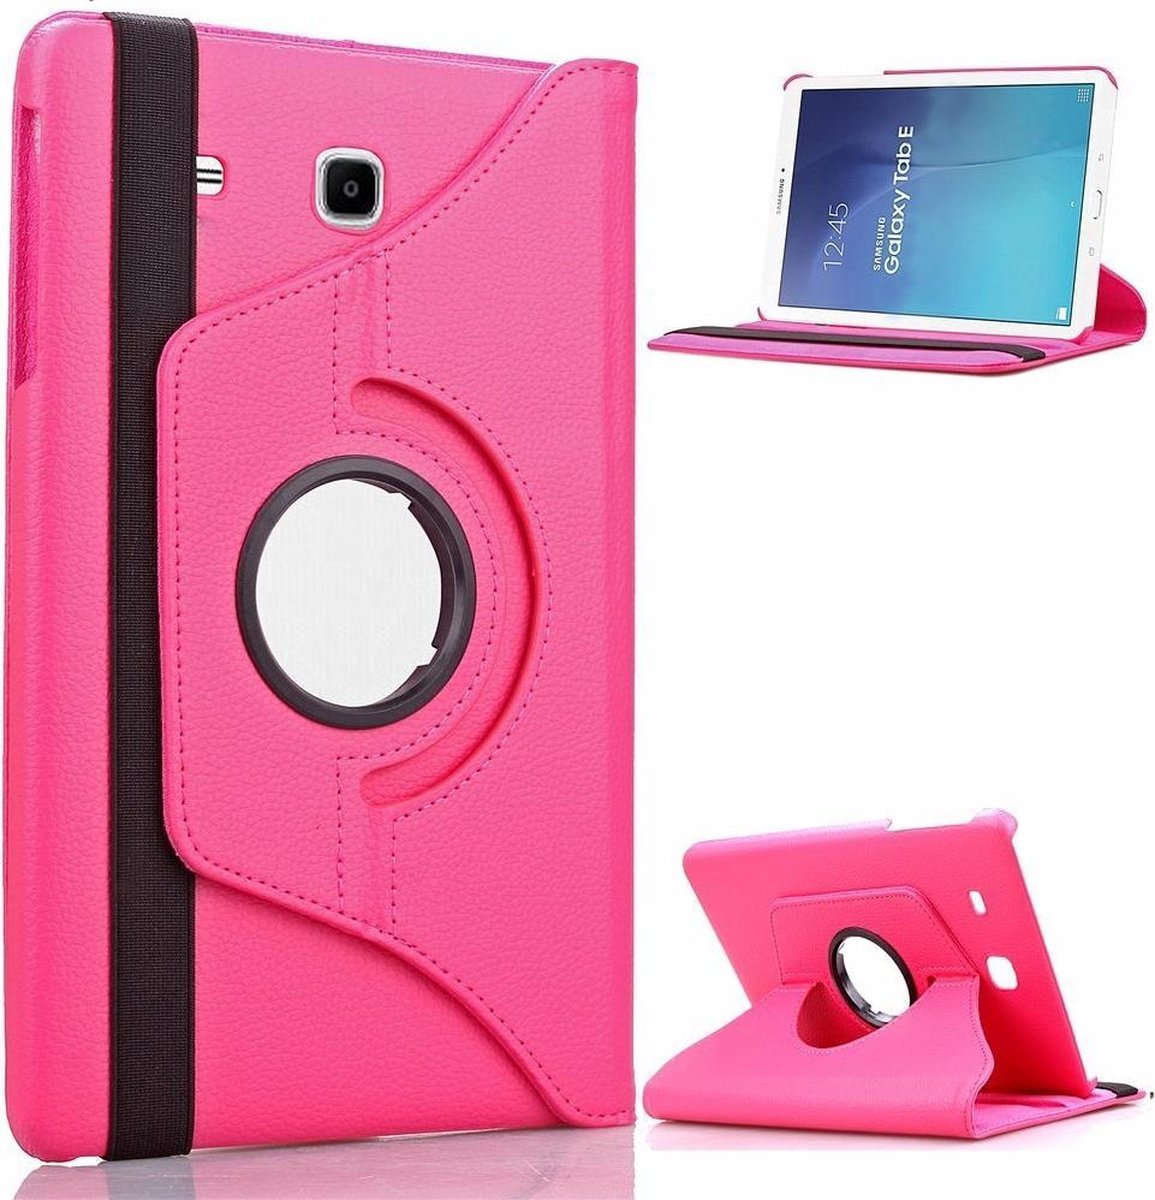 Samsung Galaxy Tab E 9.6 T560 / T561 Swivel Case 360 graden Draaibare Beschermhoes Tablethoes Cover Hoes met Multi-stand - Kleur Hot Pink / Magenta